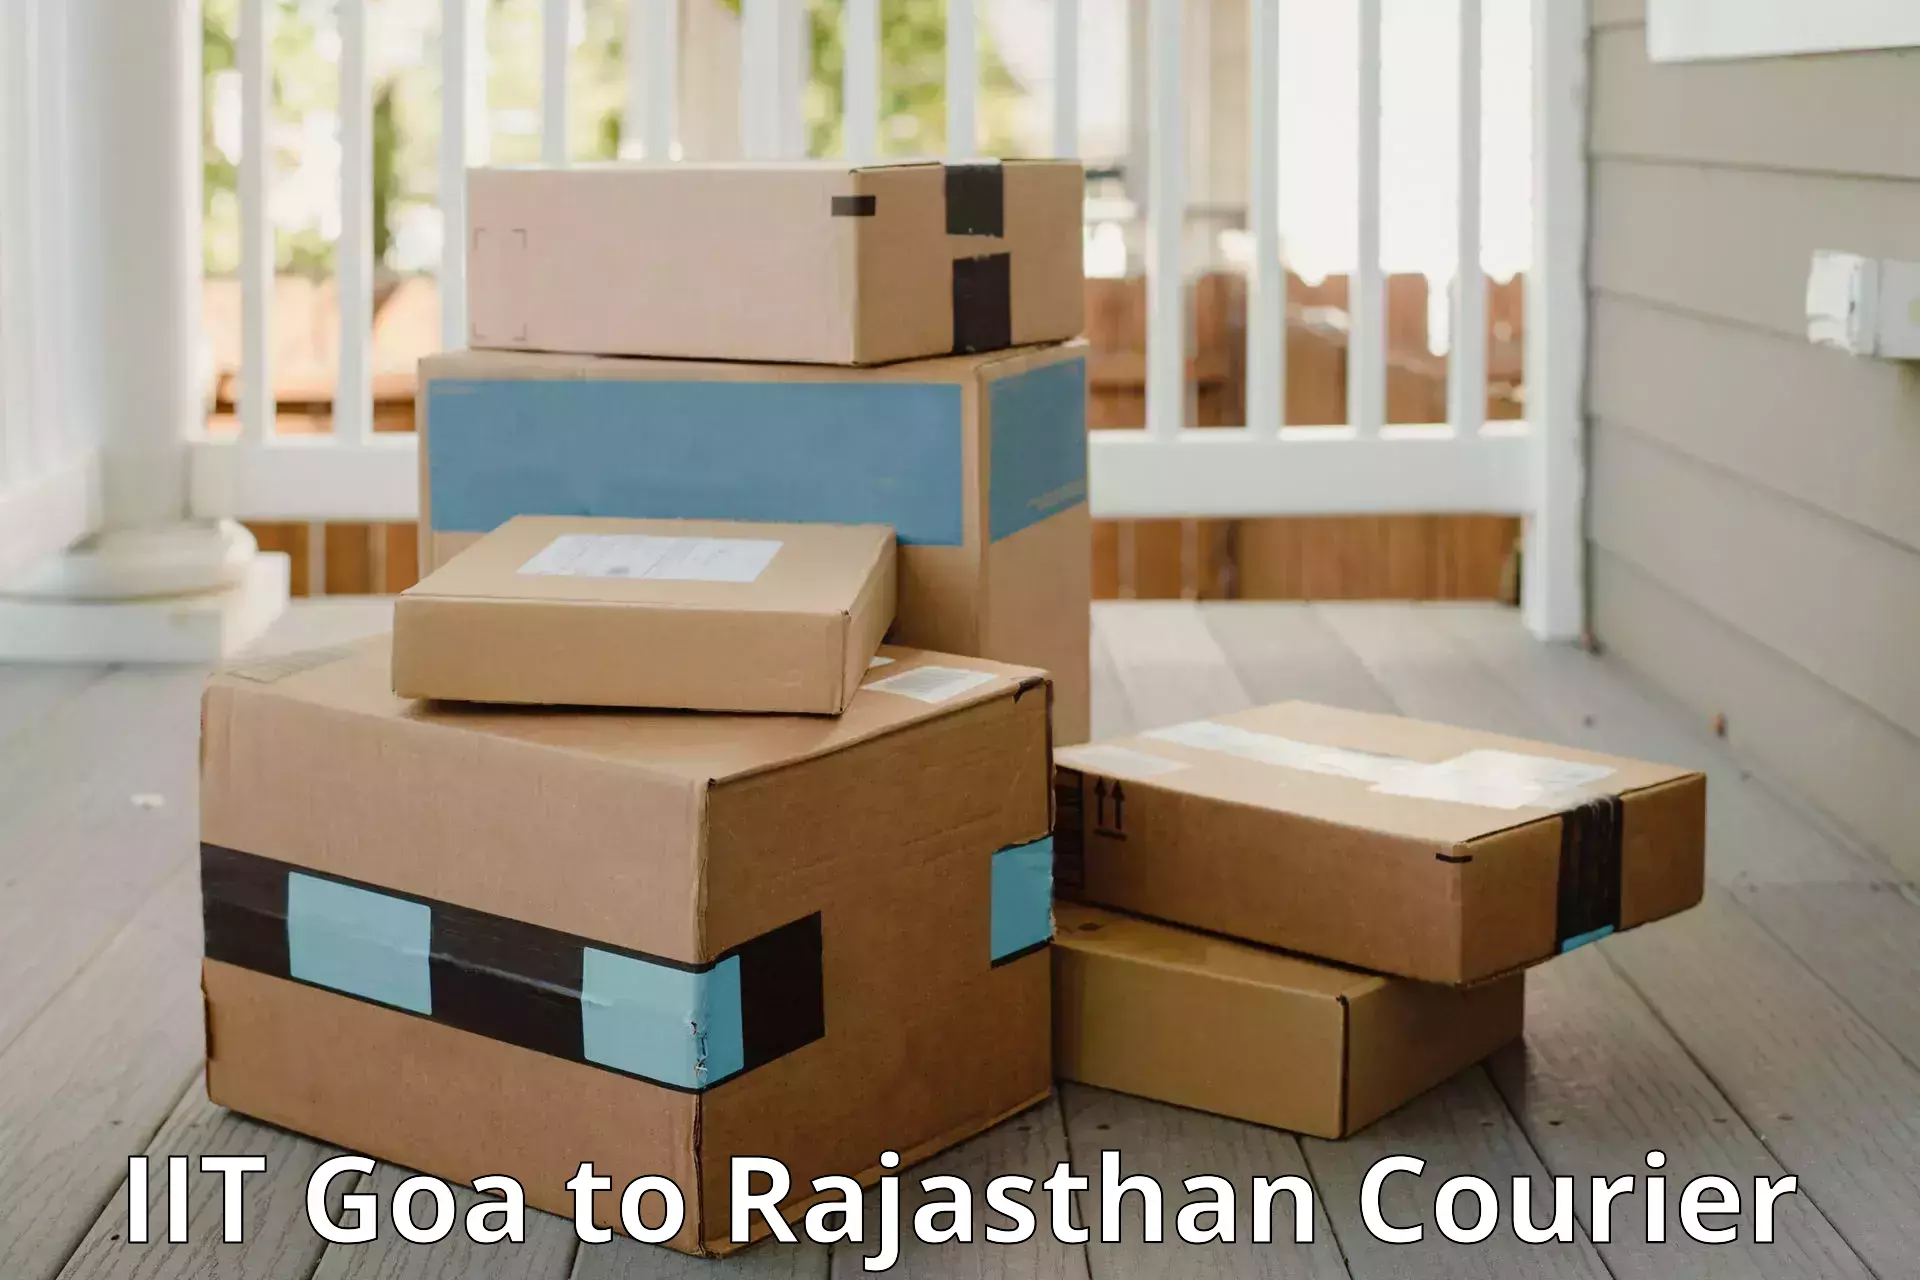 Luggage transfer service in IIT Goa to Srimadhopur